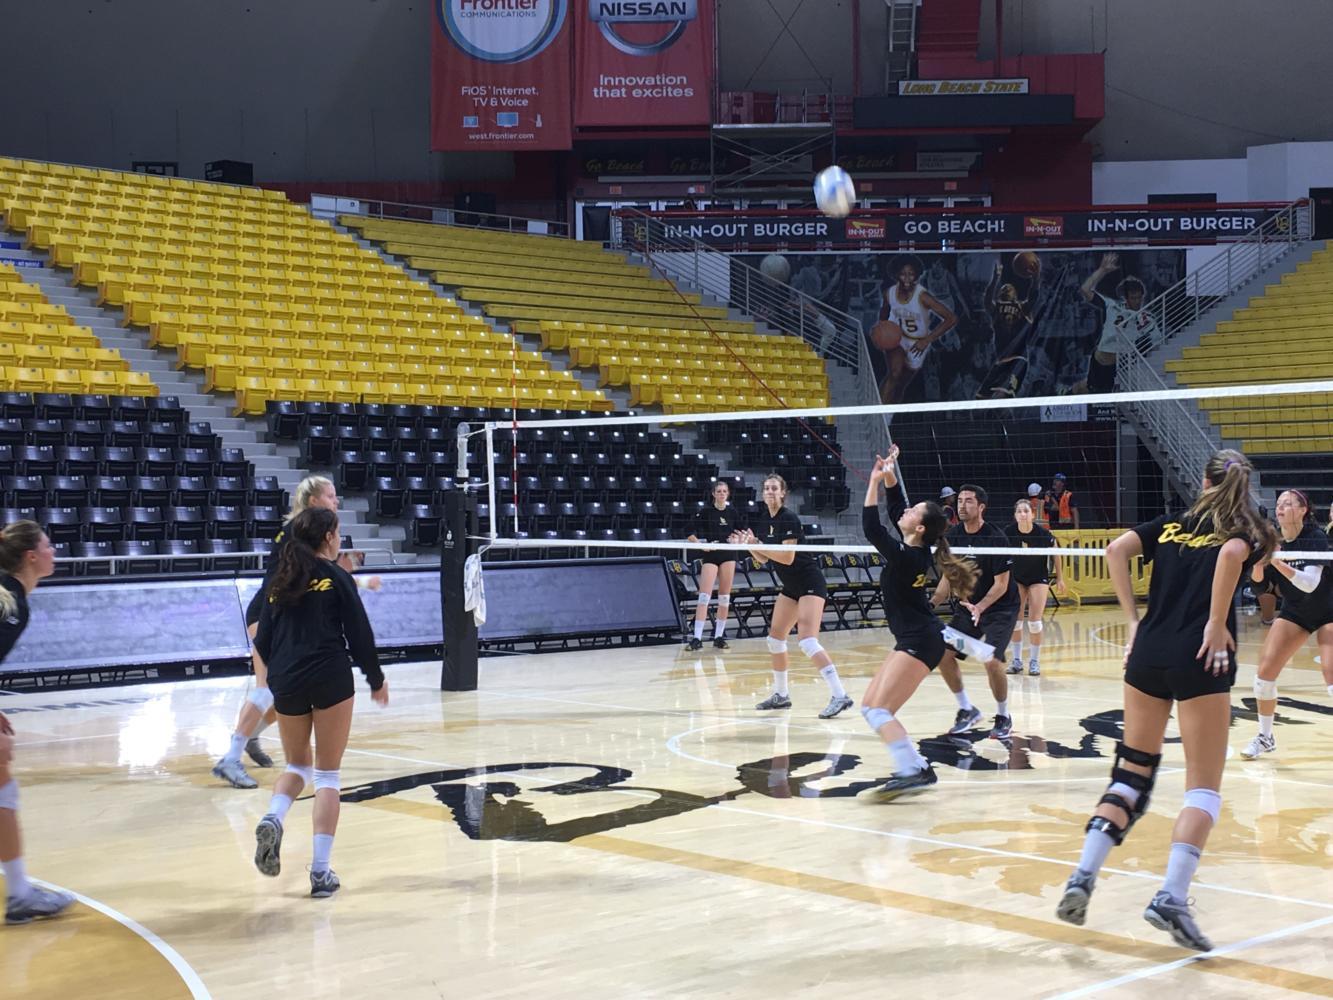 The women's volleyball team scrimmages before its Big West Conference match against Hawai'i.